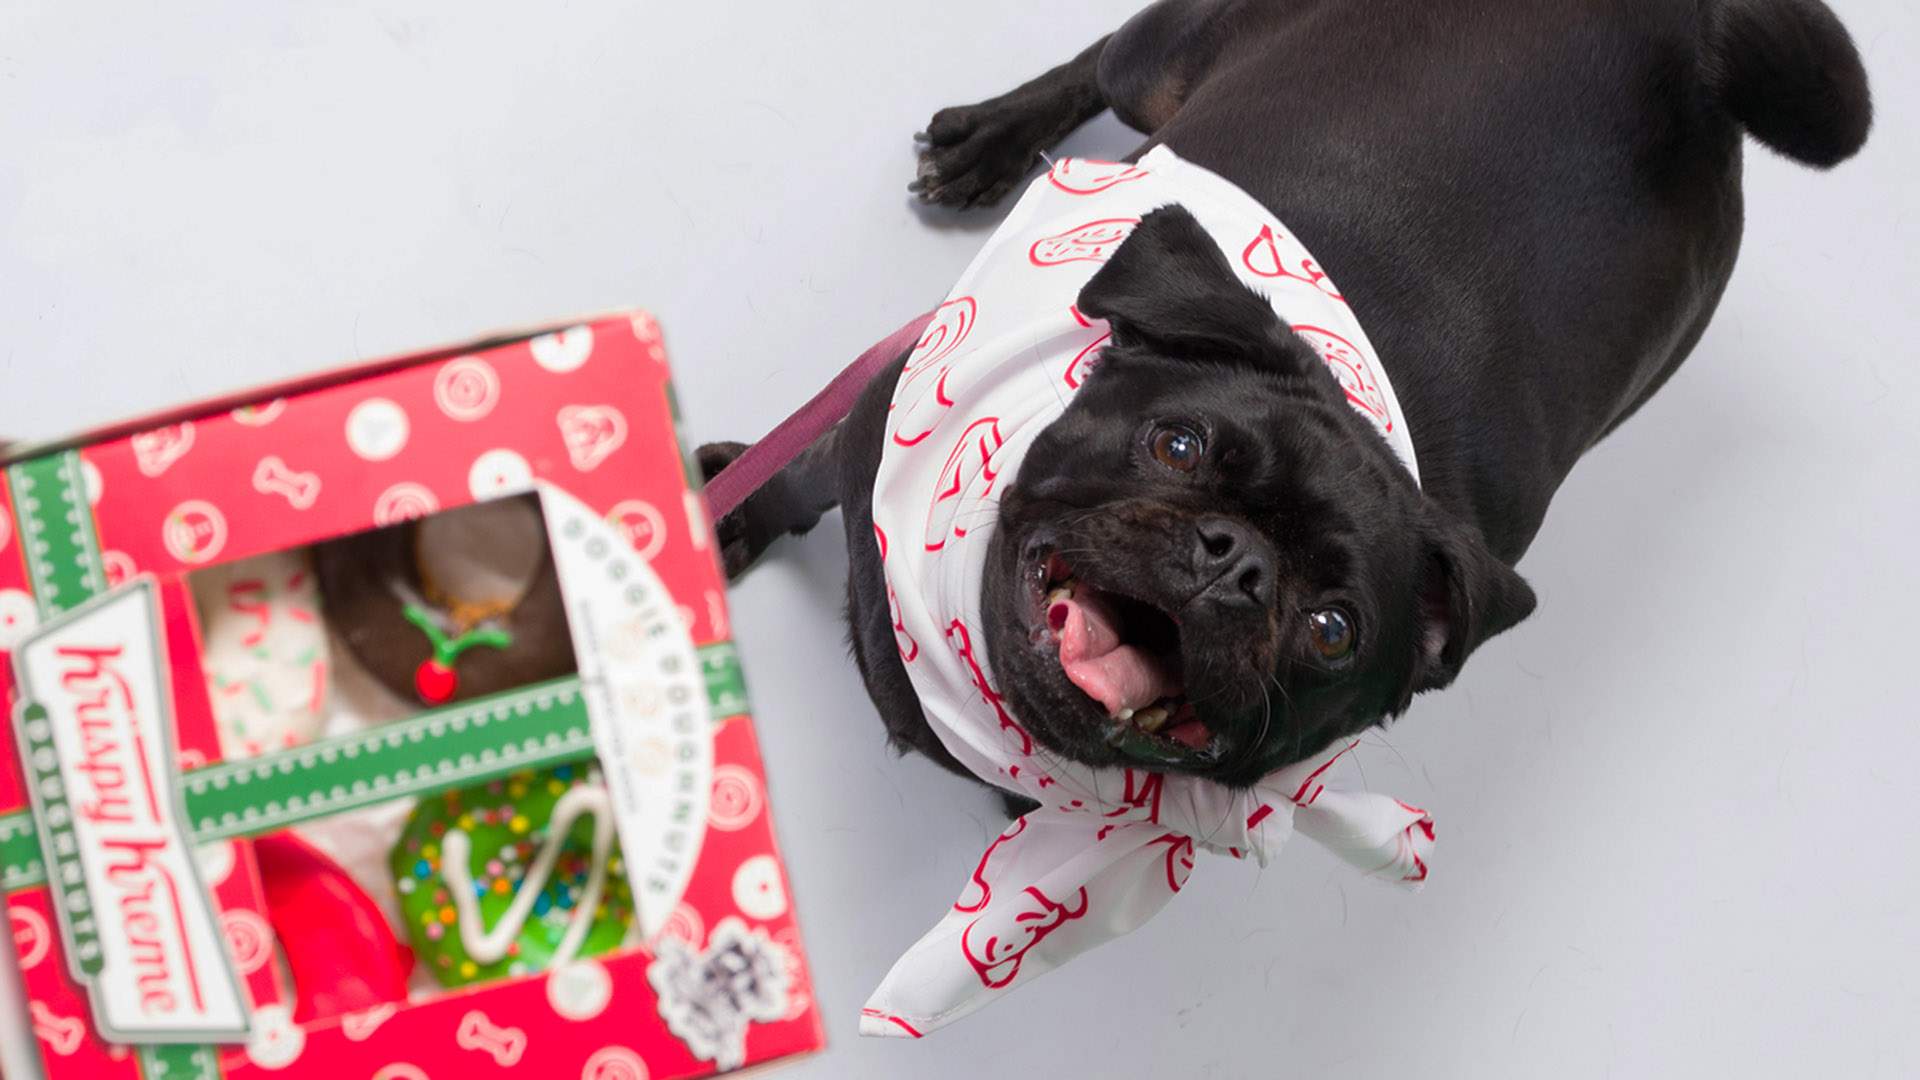 Krispy Kreme Has Dropped a New Range of Doughnut-Inspired Christmas Biscuits for Dogs